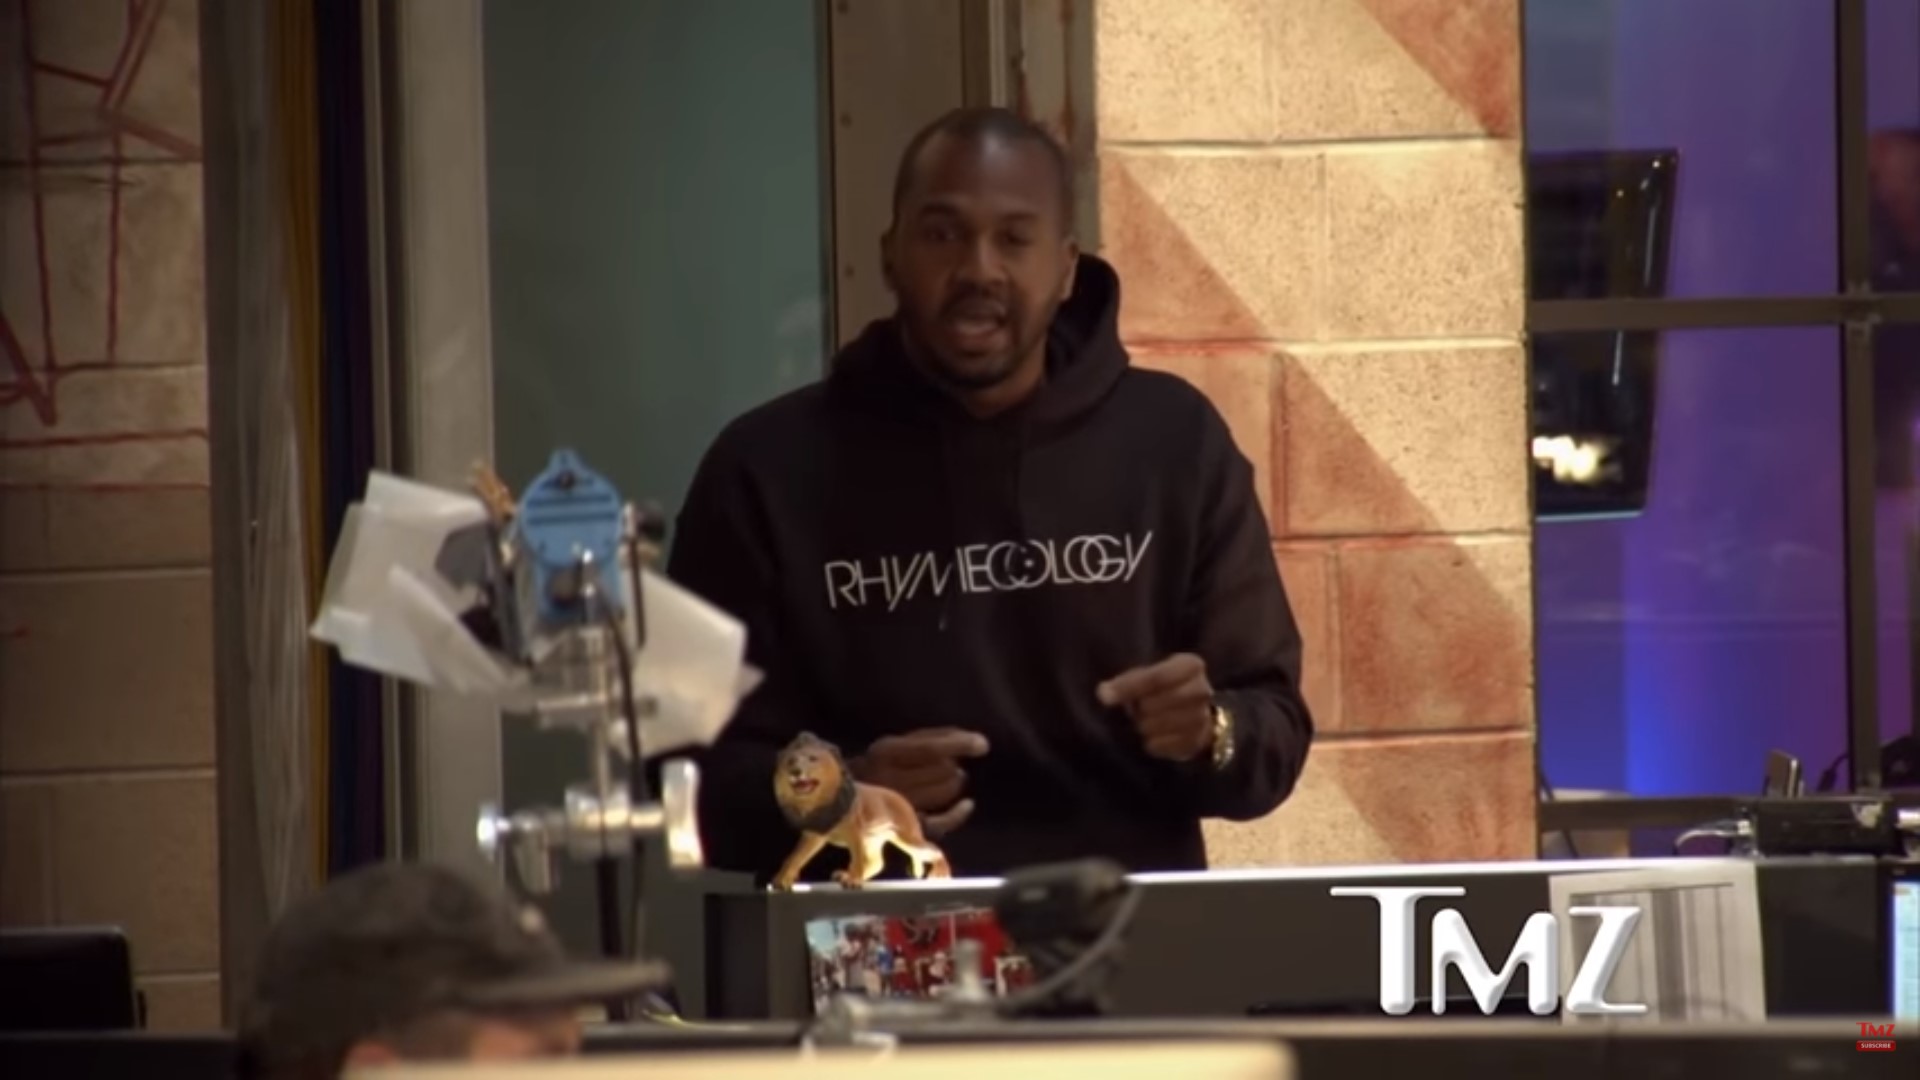 TMZ Reporter Goes Off When Kanye West Calls Slavery ‘A Choice’: ‘You Gotta Be Responsible, Man’